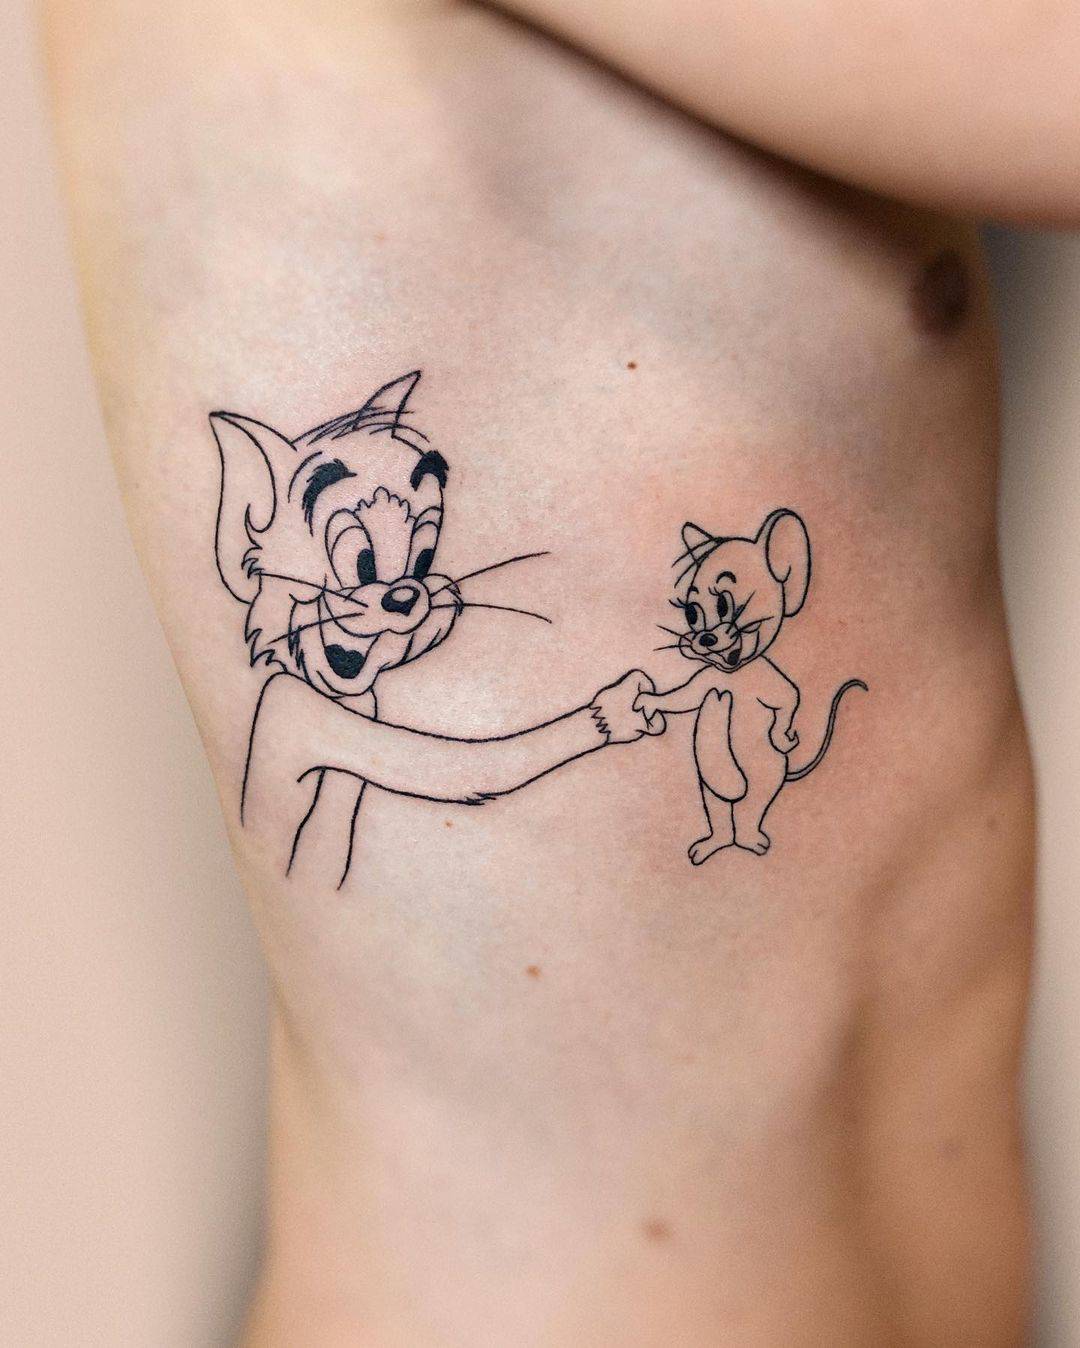 Tom and jerry tattoo by antzni